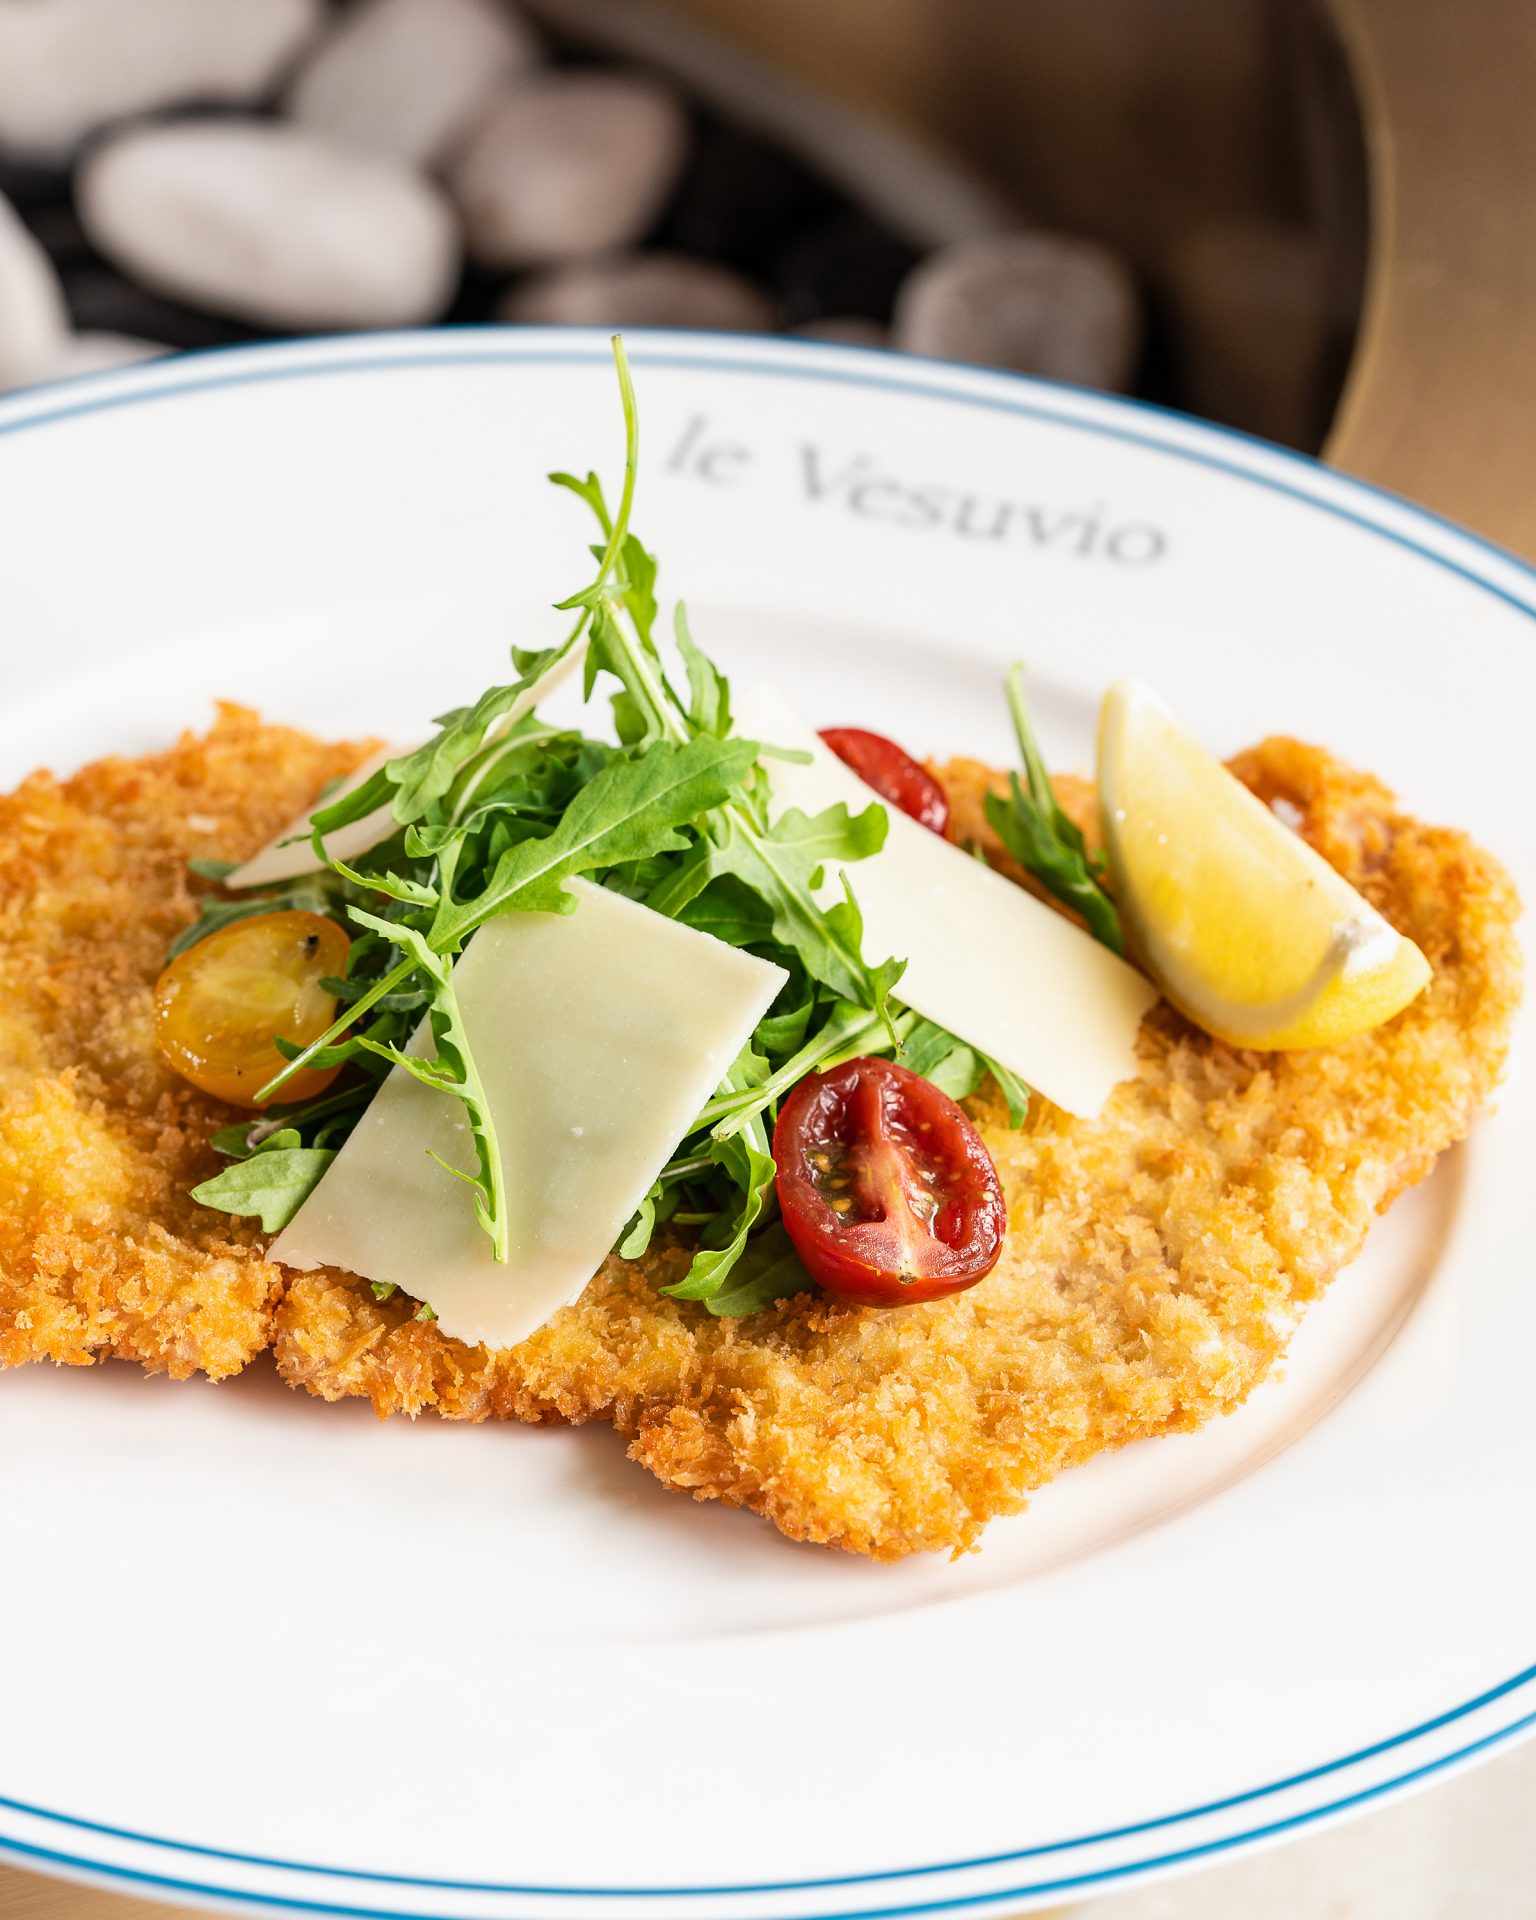 Milk-fed Veal Milanese dish served by Le Vesuvio Italian Fine Dining Restaurant in Jeddah Yacht Club